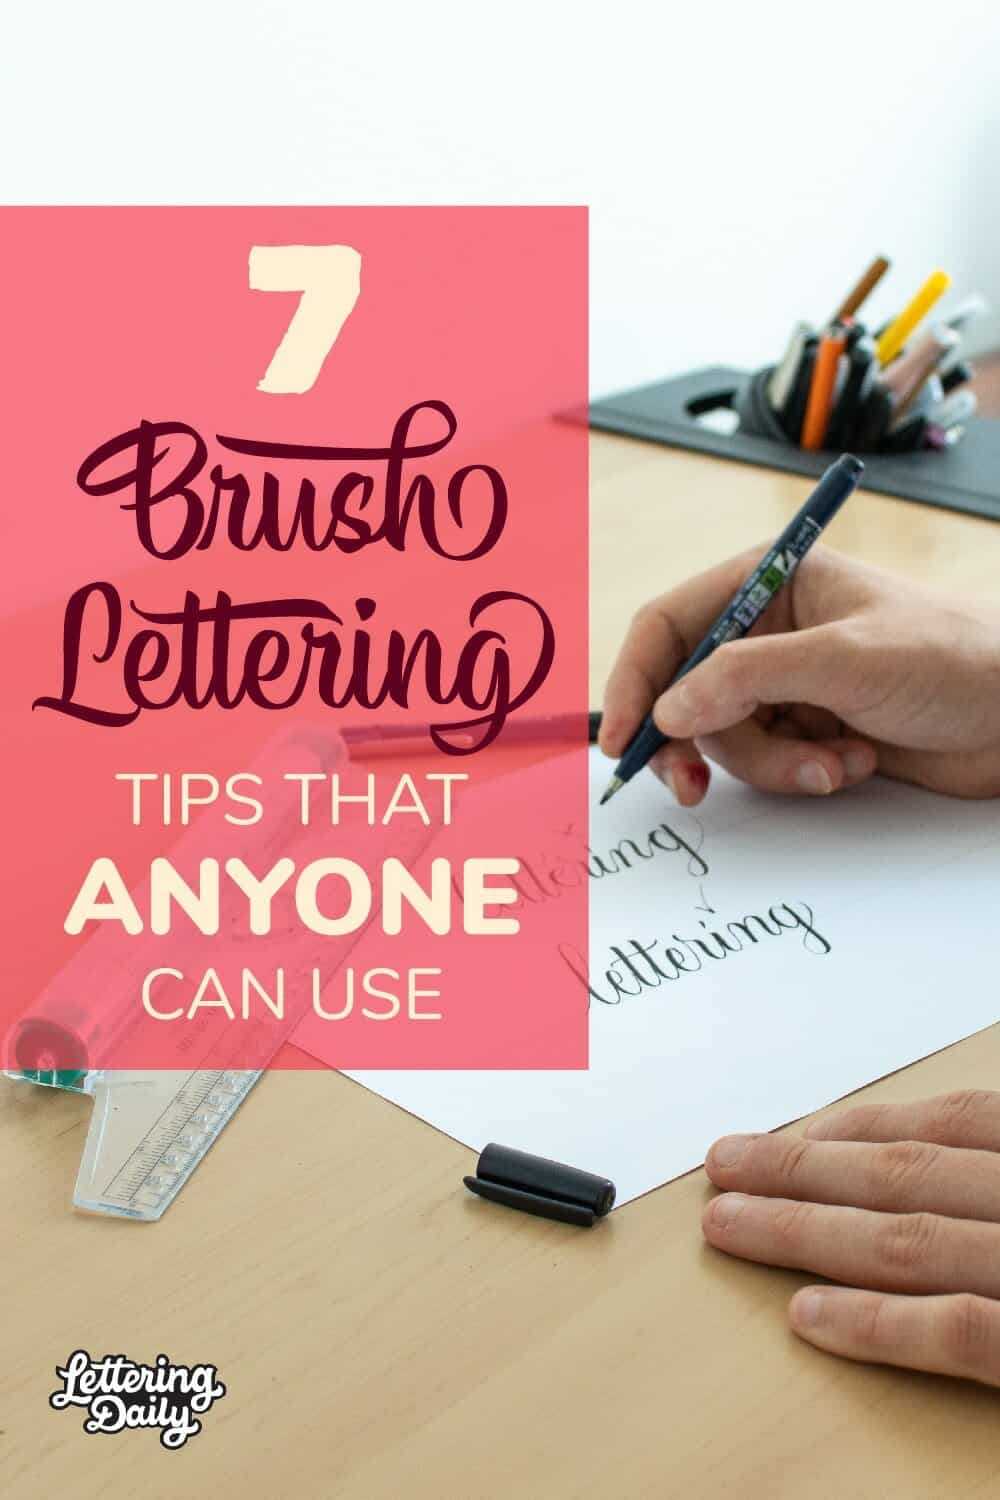 Life Unscripted: Tips for Lettering with a Brush Pen